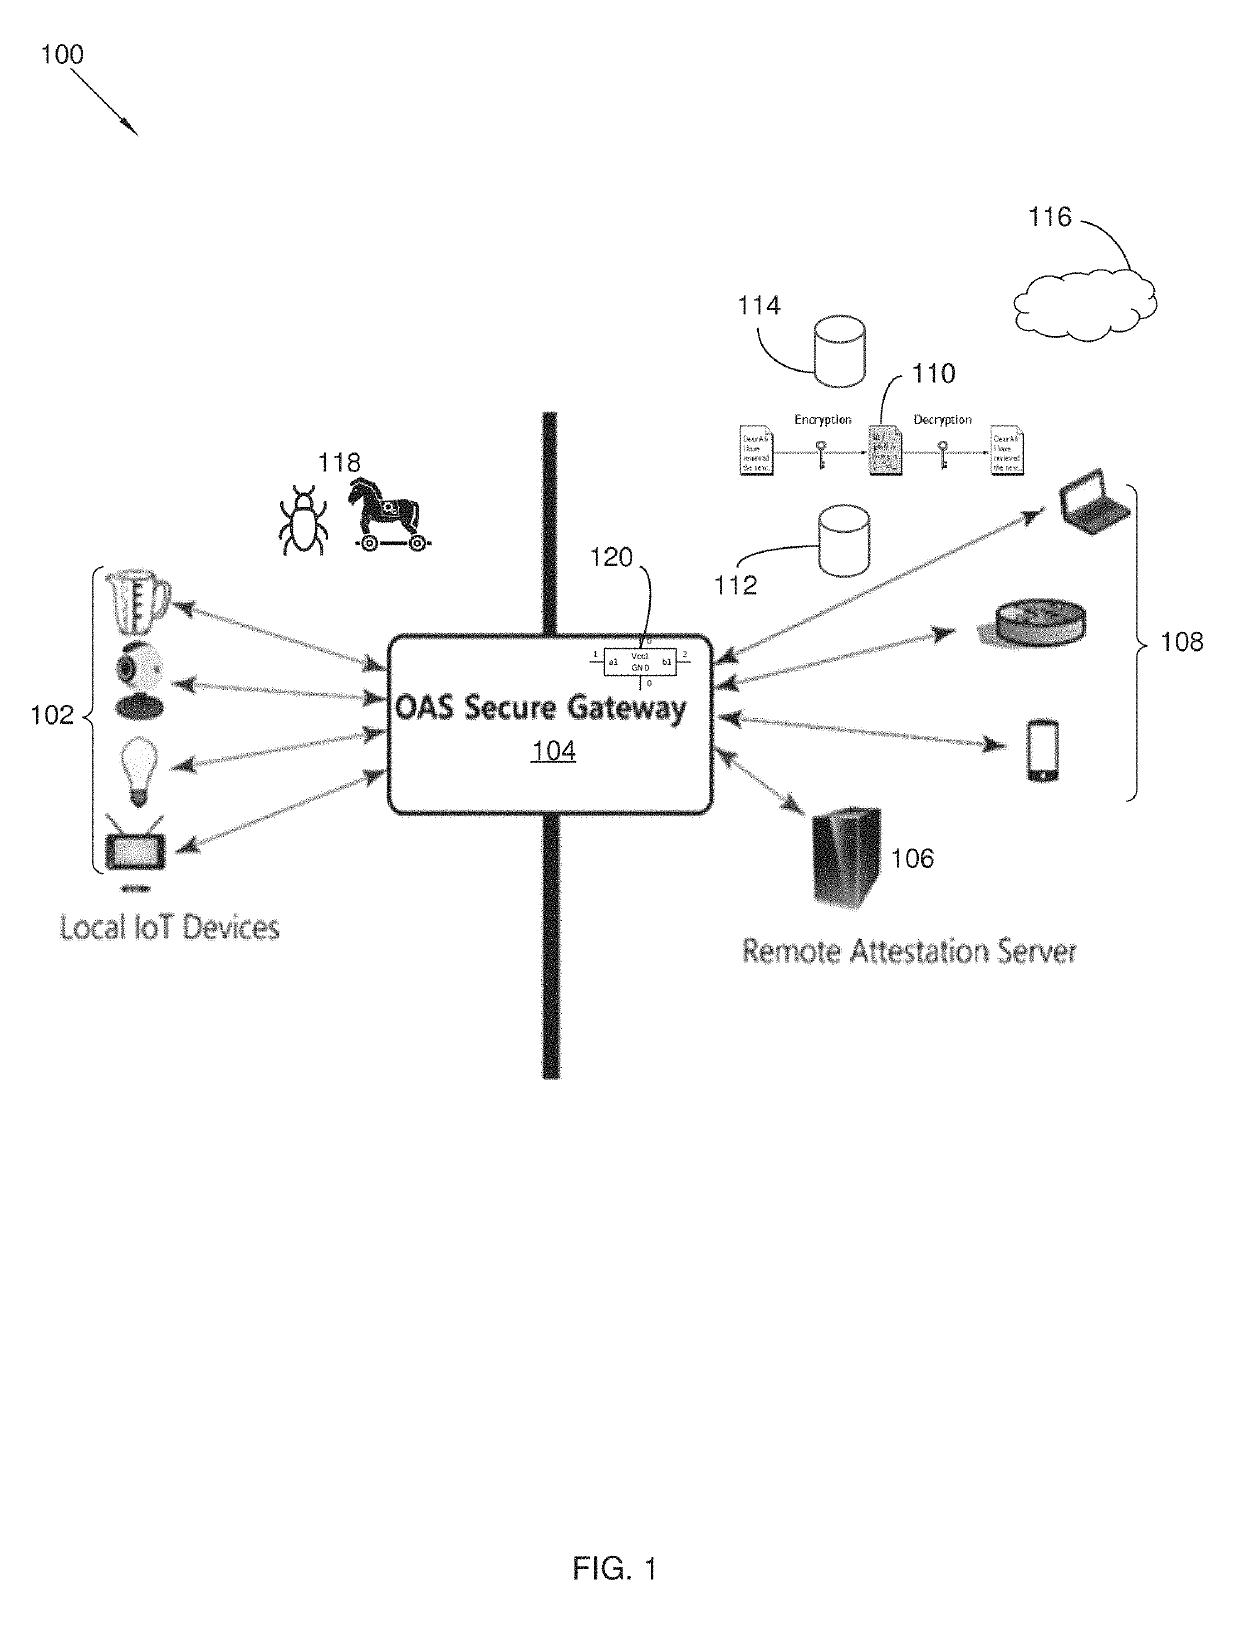 Security system and method for internet of things